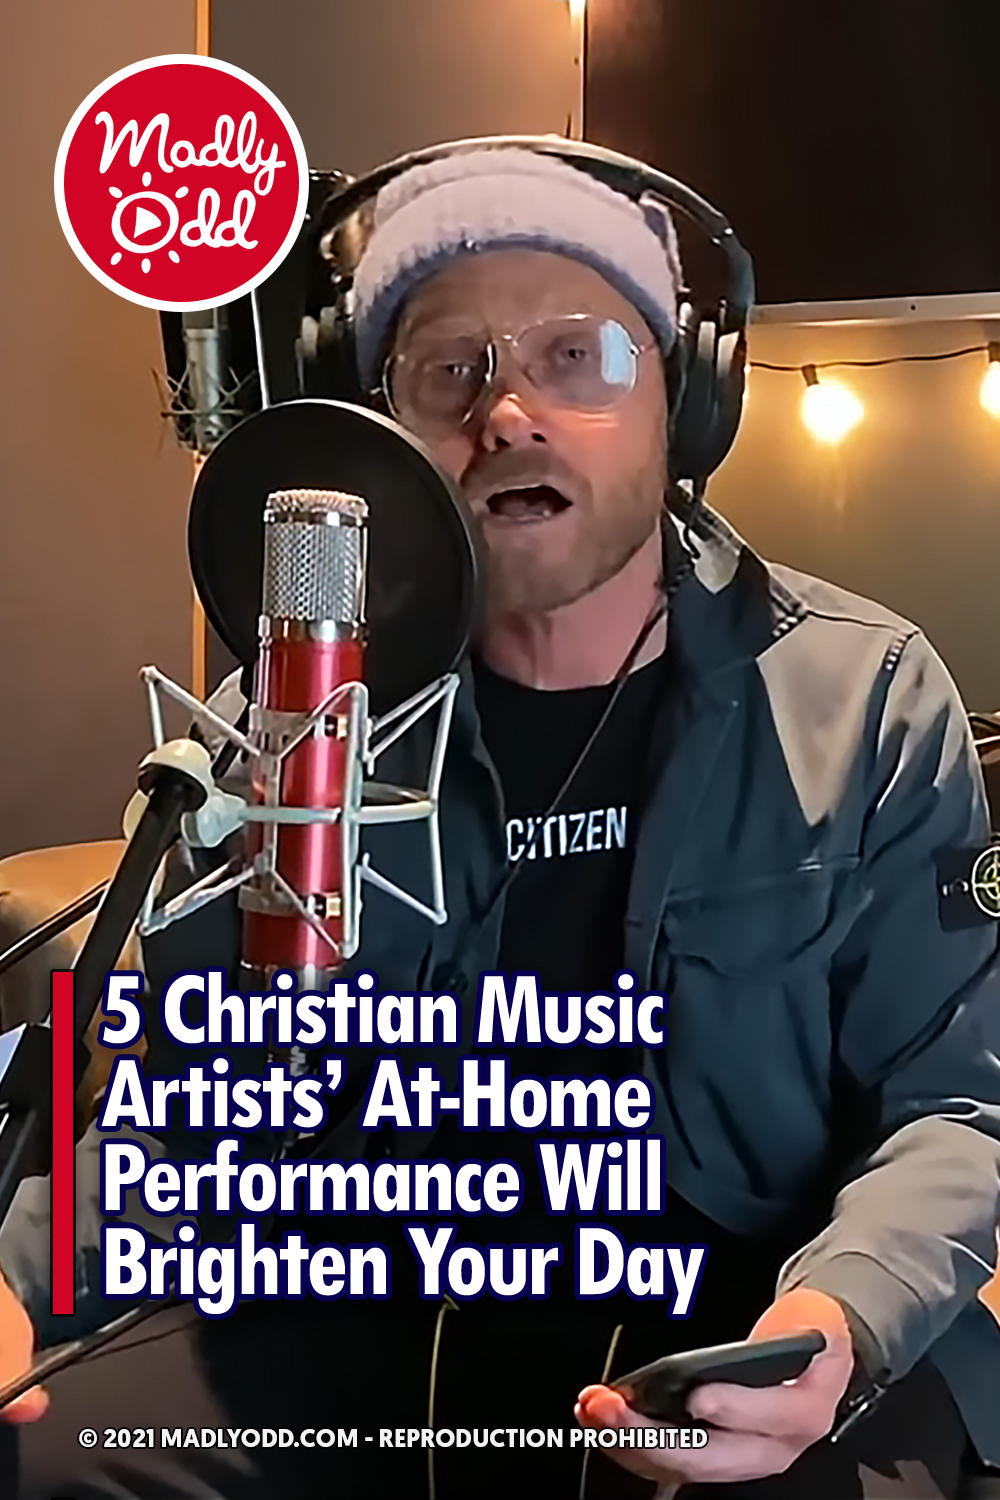 5 Christian Music Artists’ At-Home Performance Will Brighten Your Day